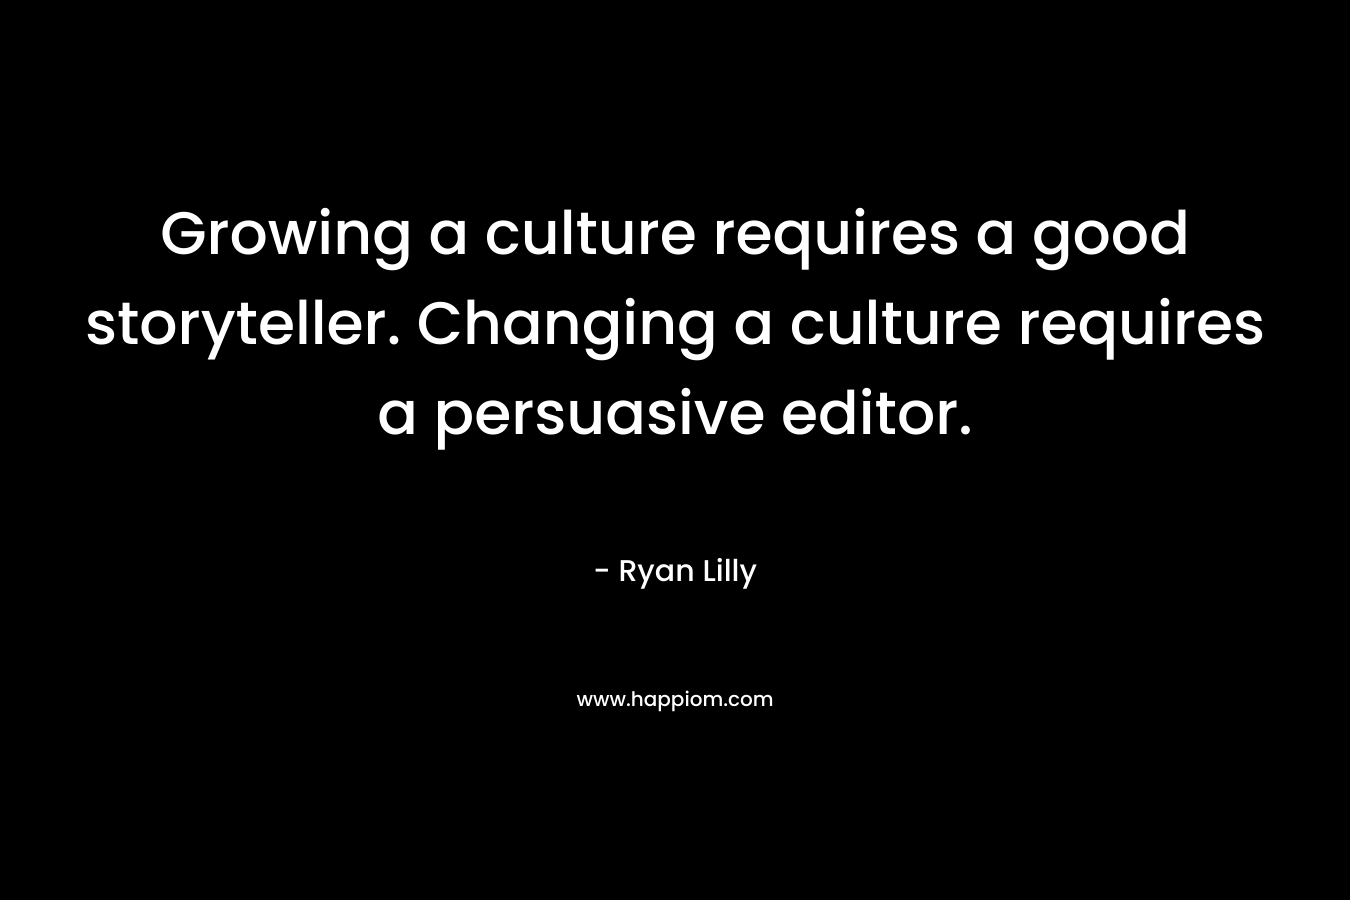 Growing a culture requires a good storyteller. Changing a culture requires a persuasive editor.